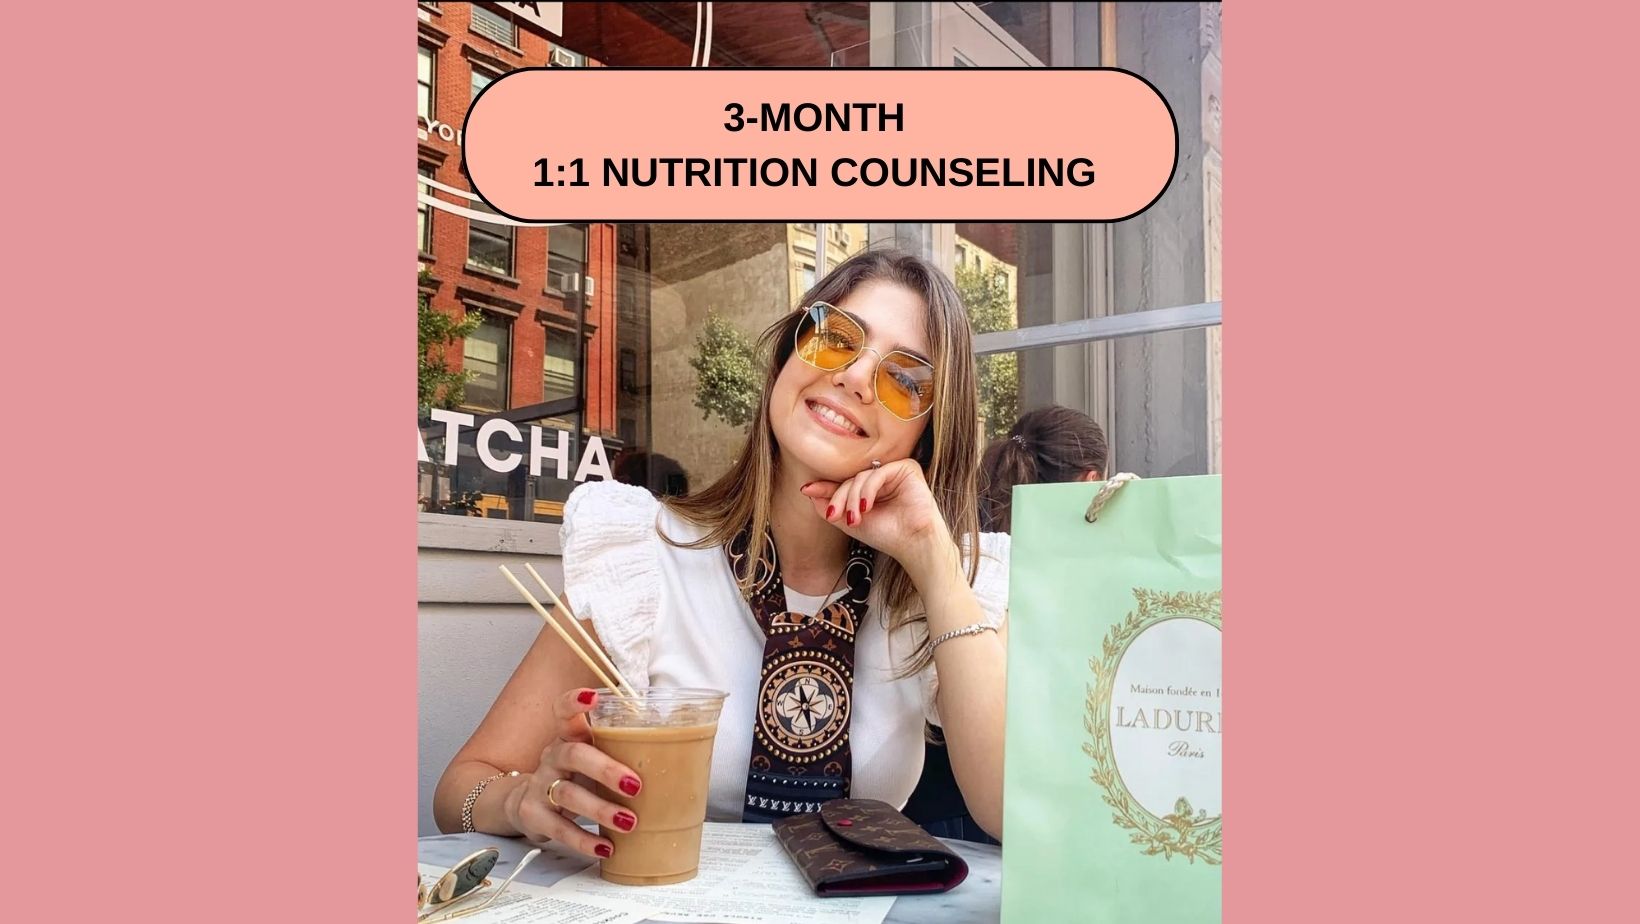 3 MONTH NUTRITION COUNSELING.jpg